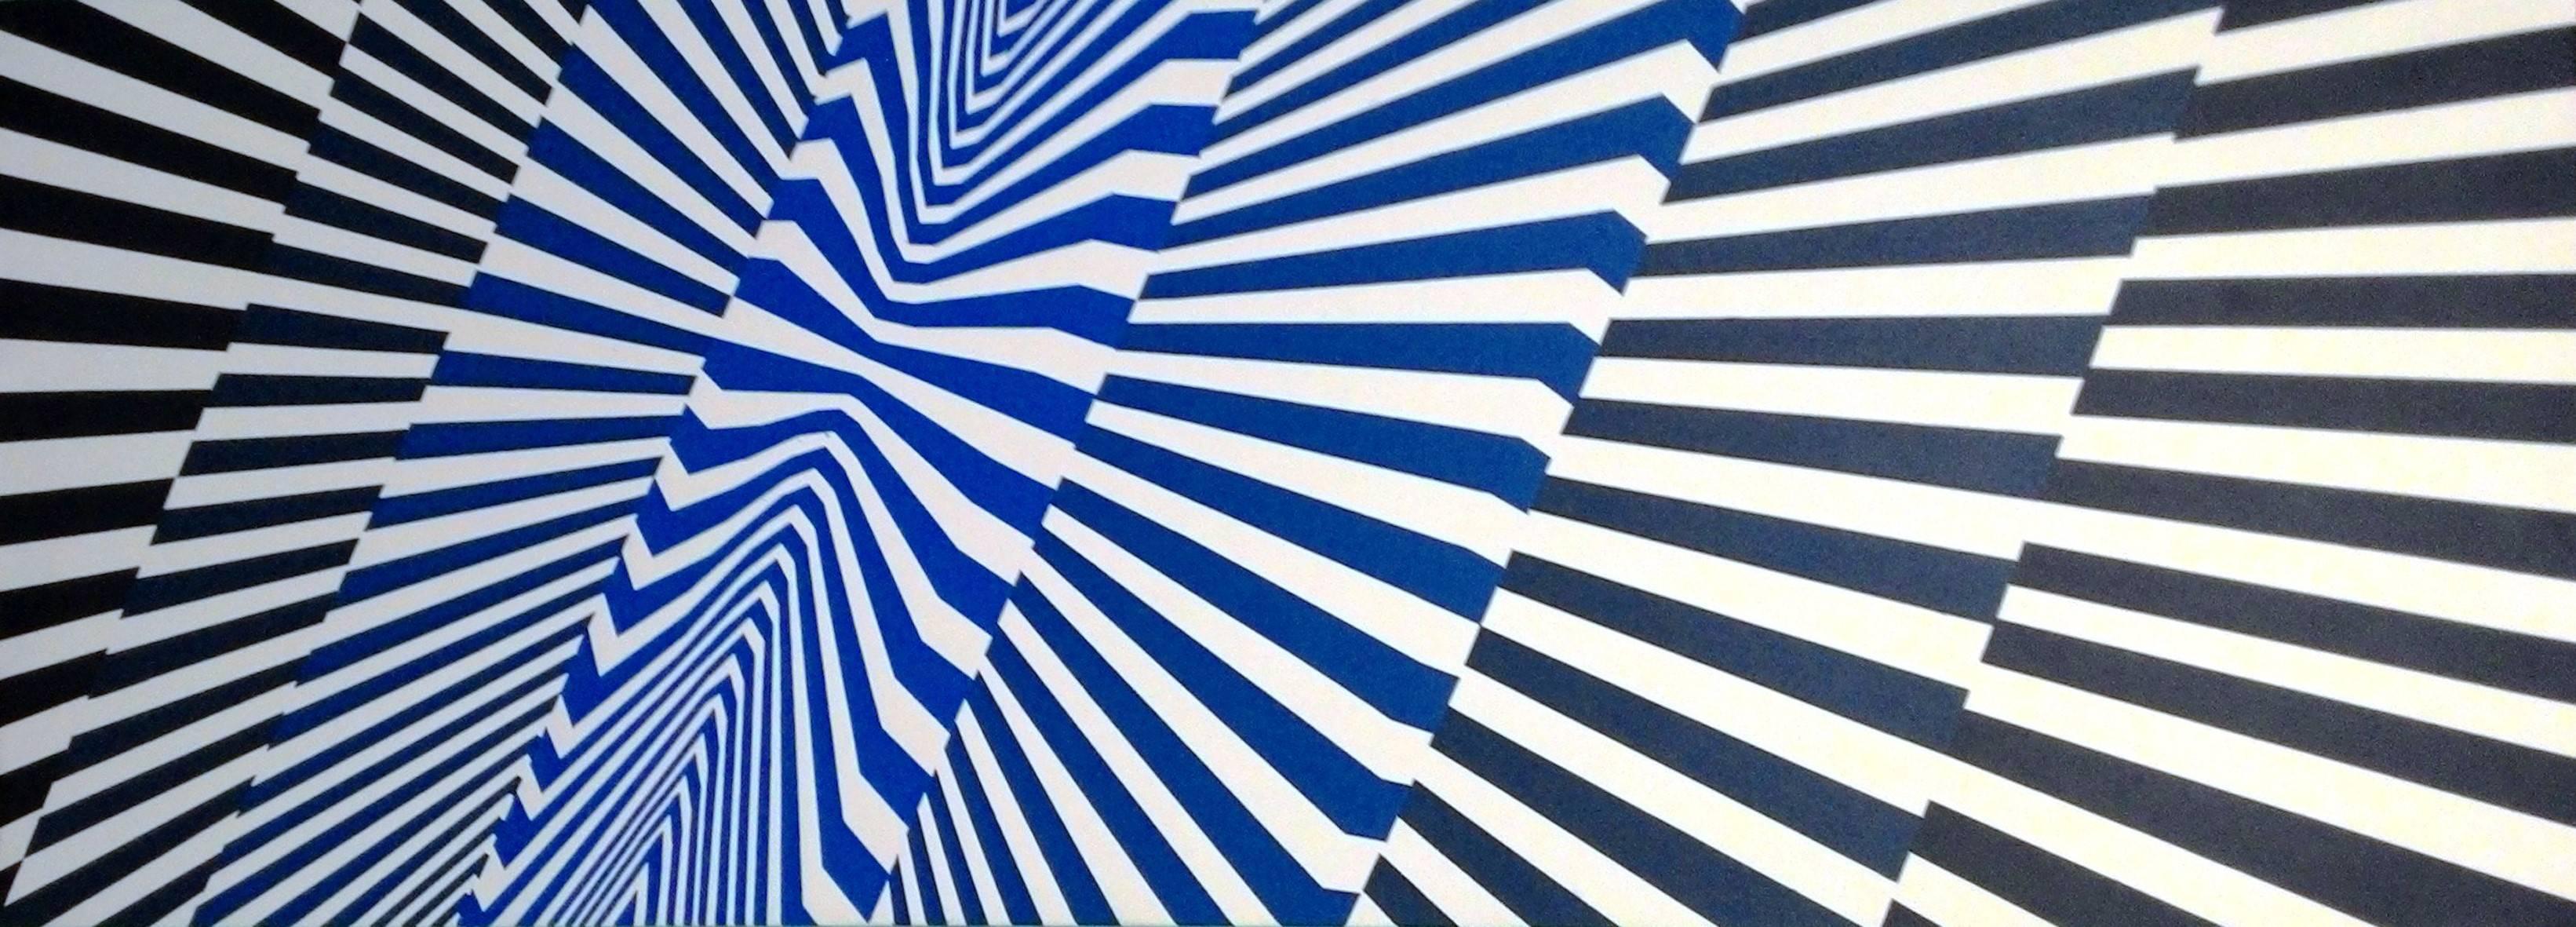 Cristina Ghetti Abstract Painting - 'Folding Pattern' Blue and White Abstract Kinetic Painting